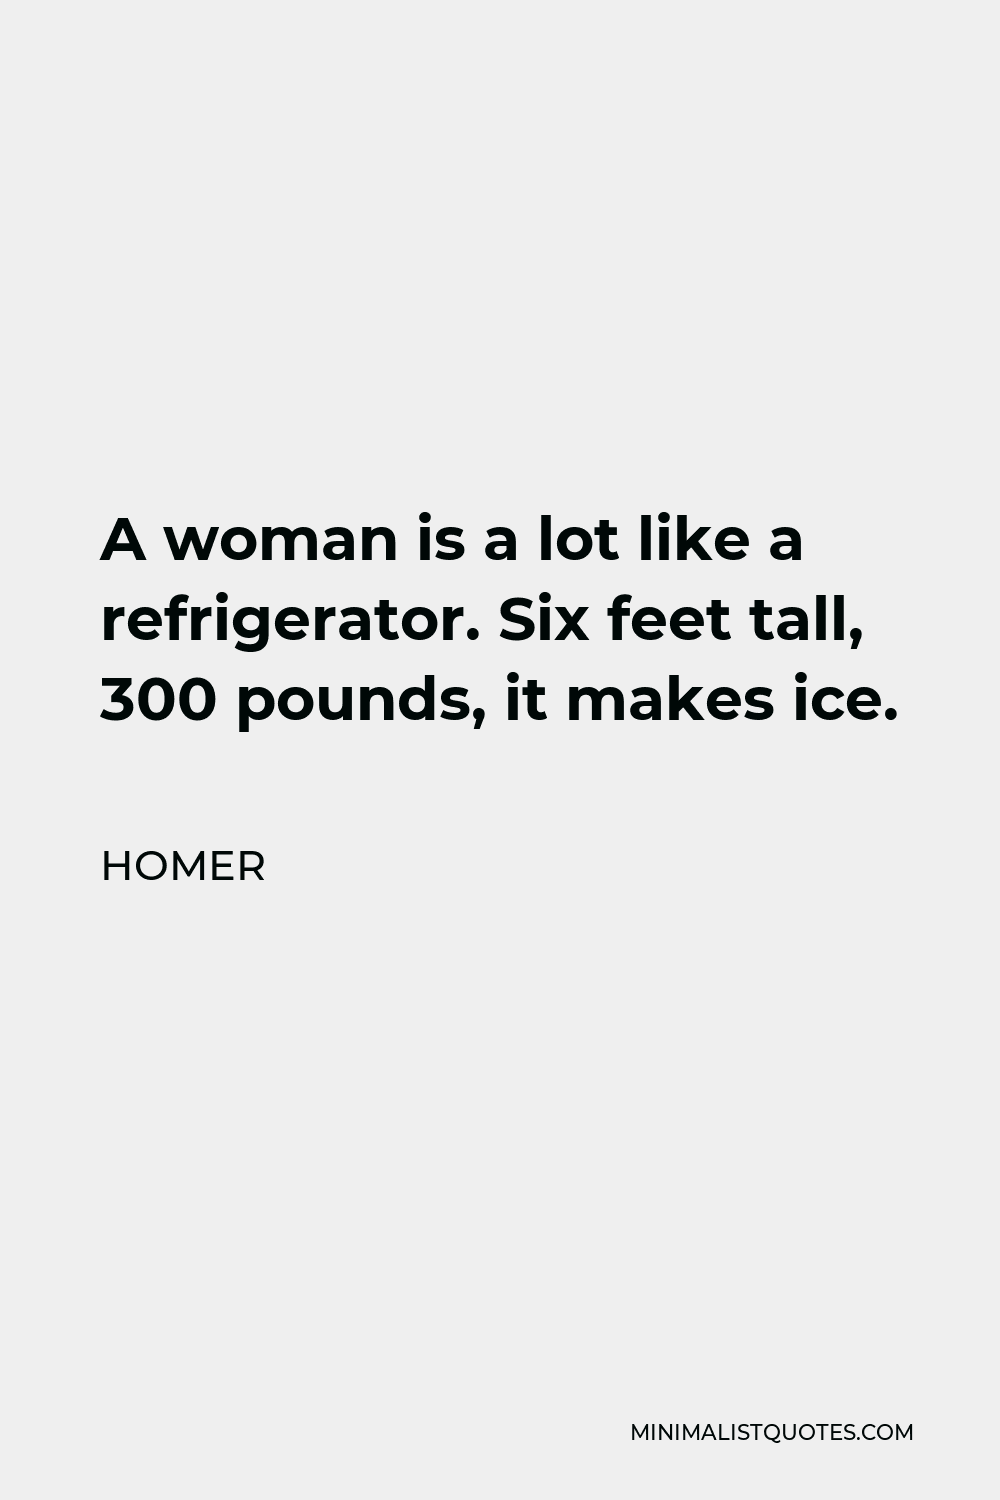 Homer Quote - A woman is a lot like a refrigerator. Six feet tall, 300 pounds, it makes ice.